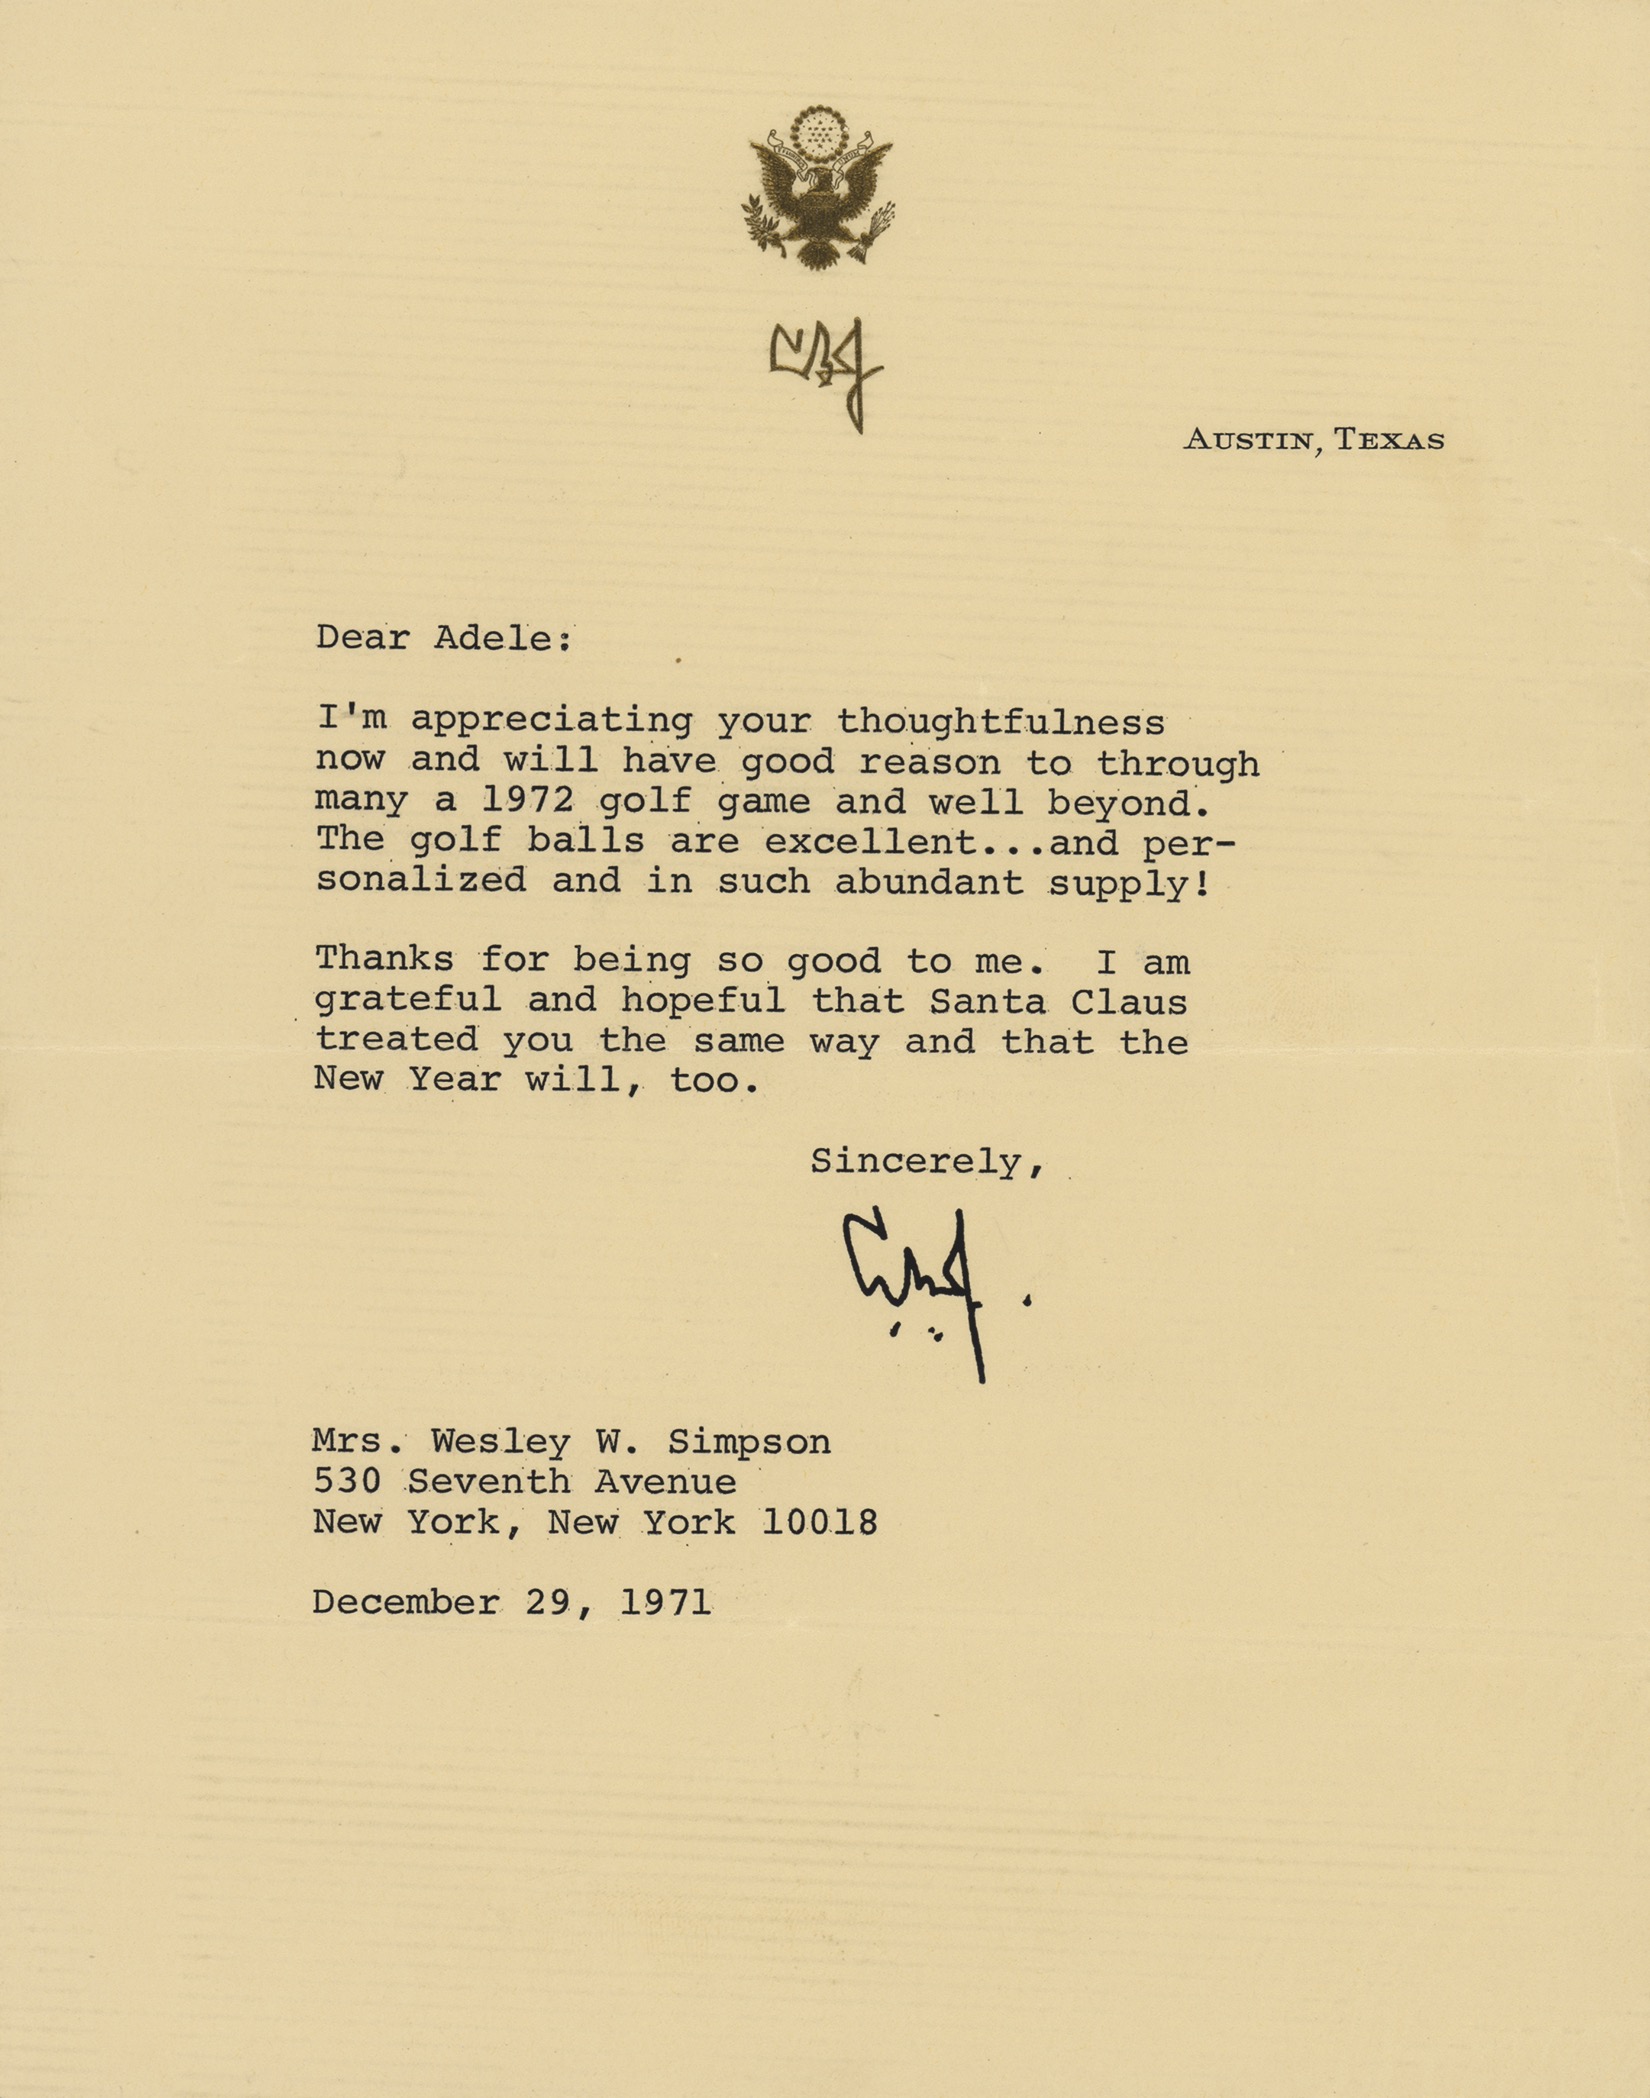 Lot #110 Lyndon and Lady Bird Johnson (2) Typed Letters Signed - Image 1